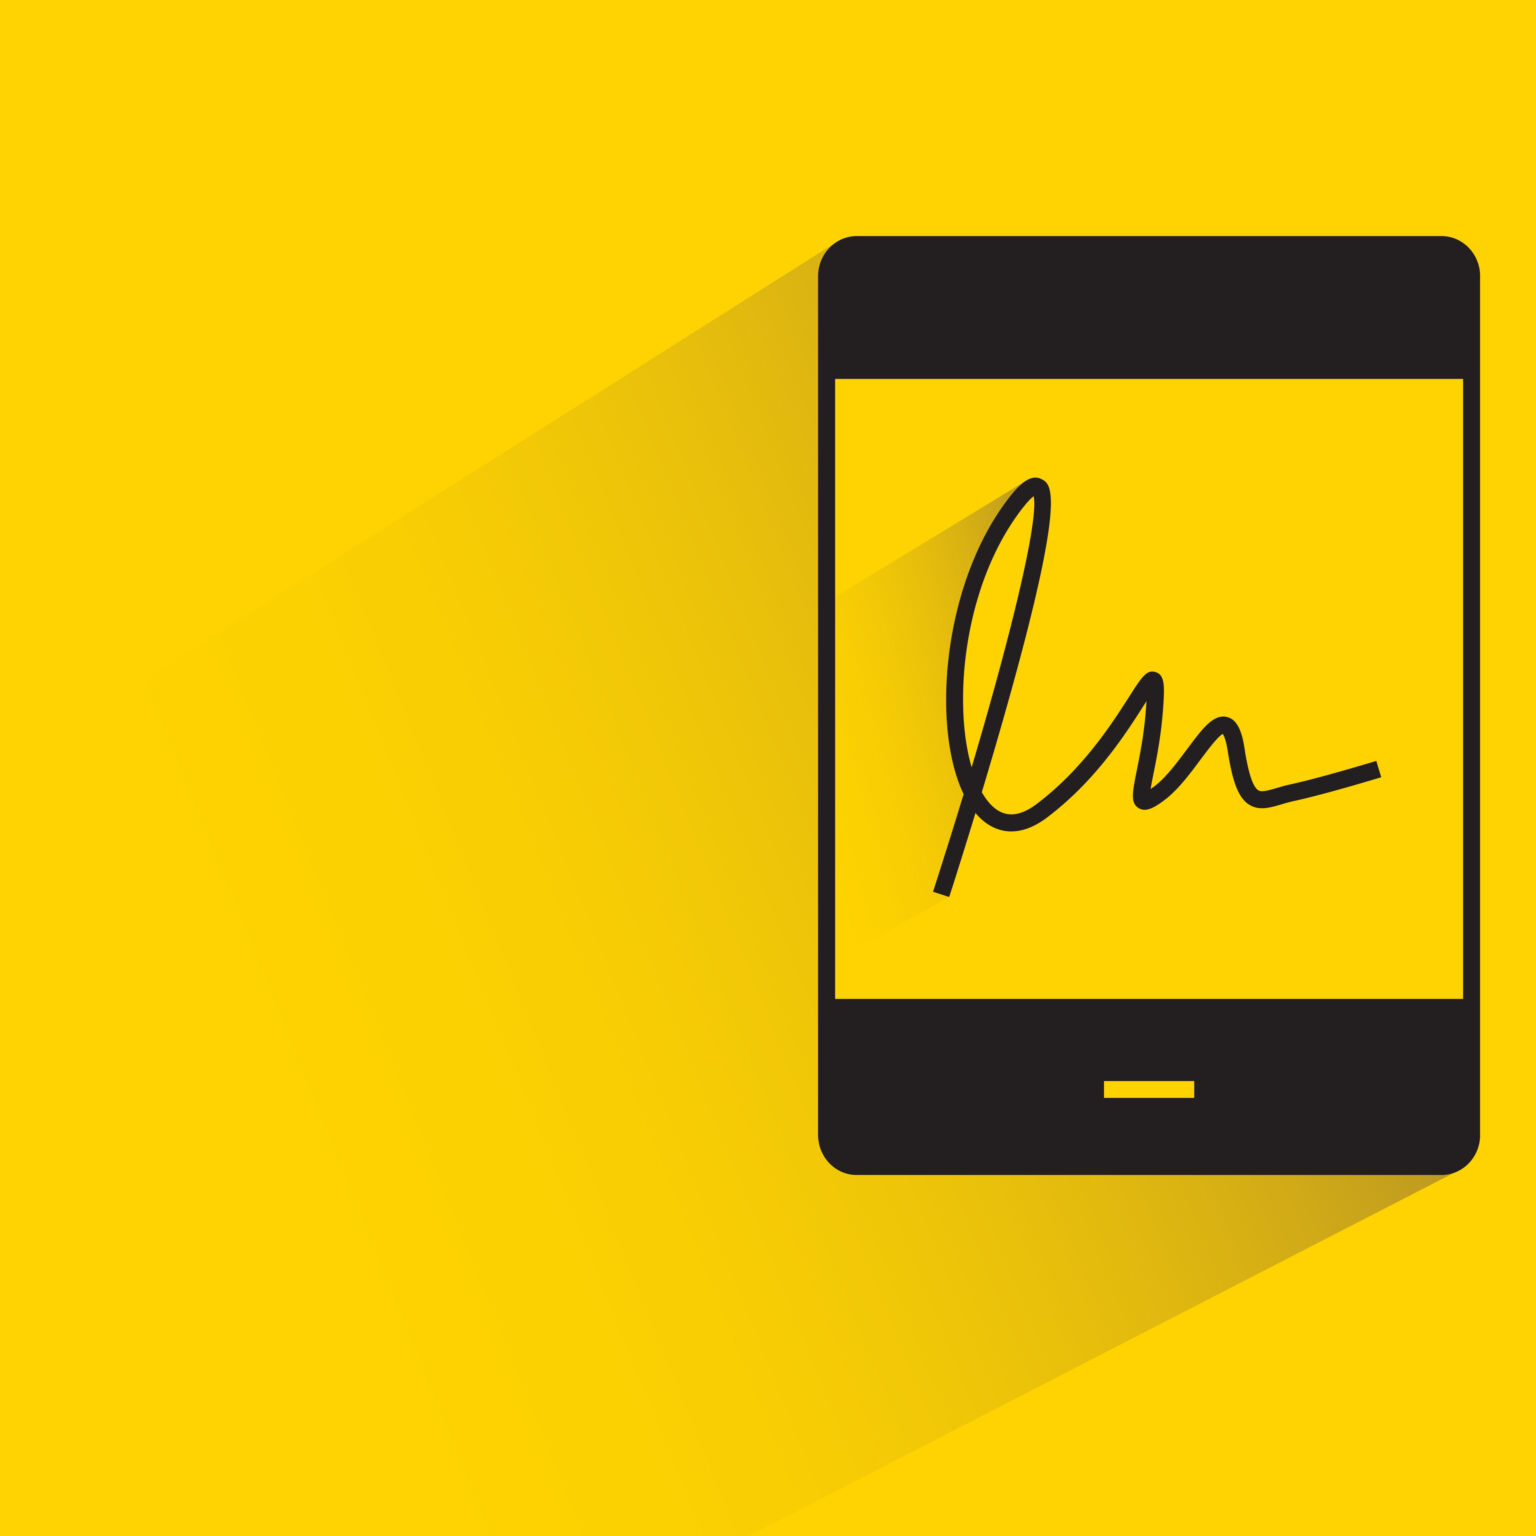 A graphic of a black E-signature pad with a stylized signature displayed, set against a bright yellow background.